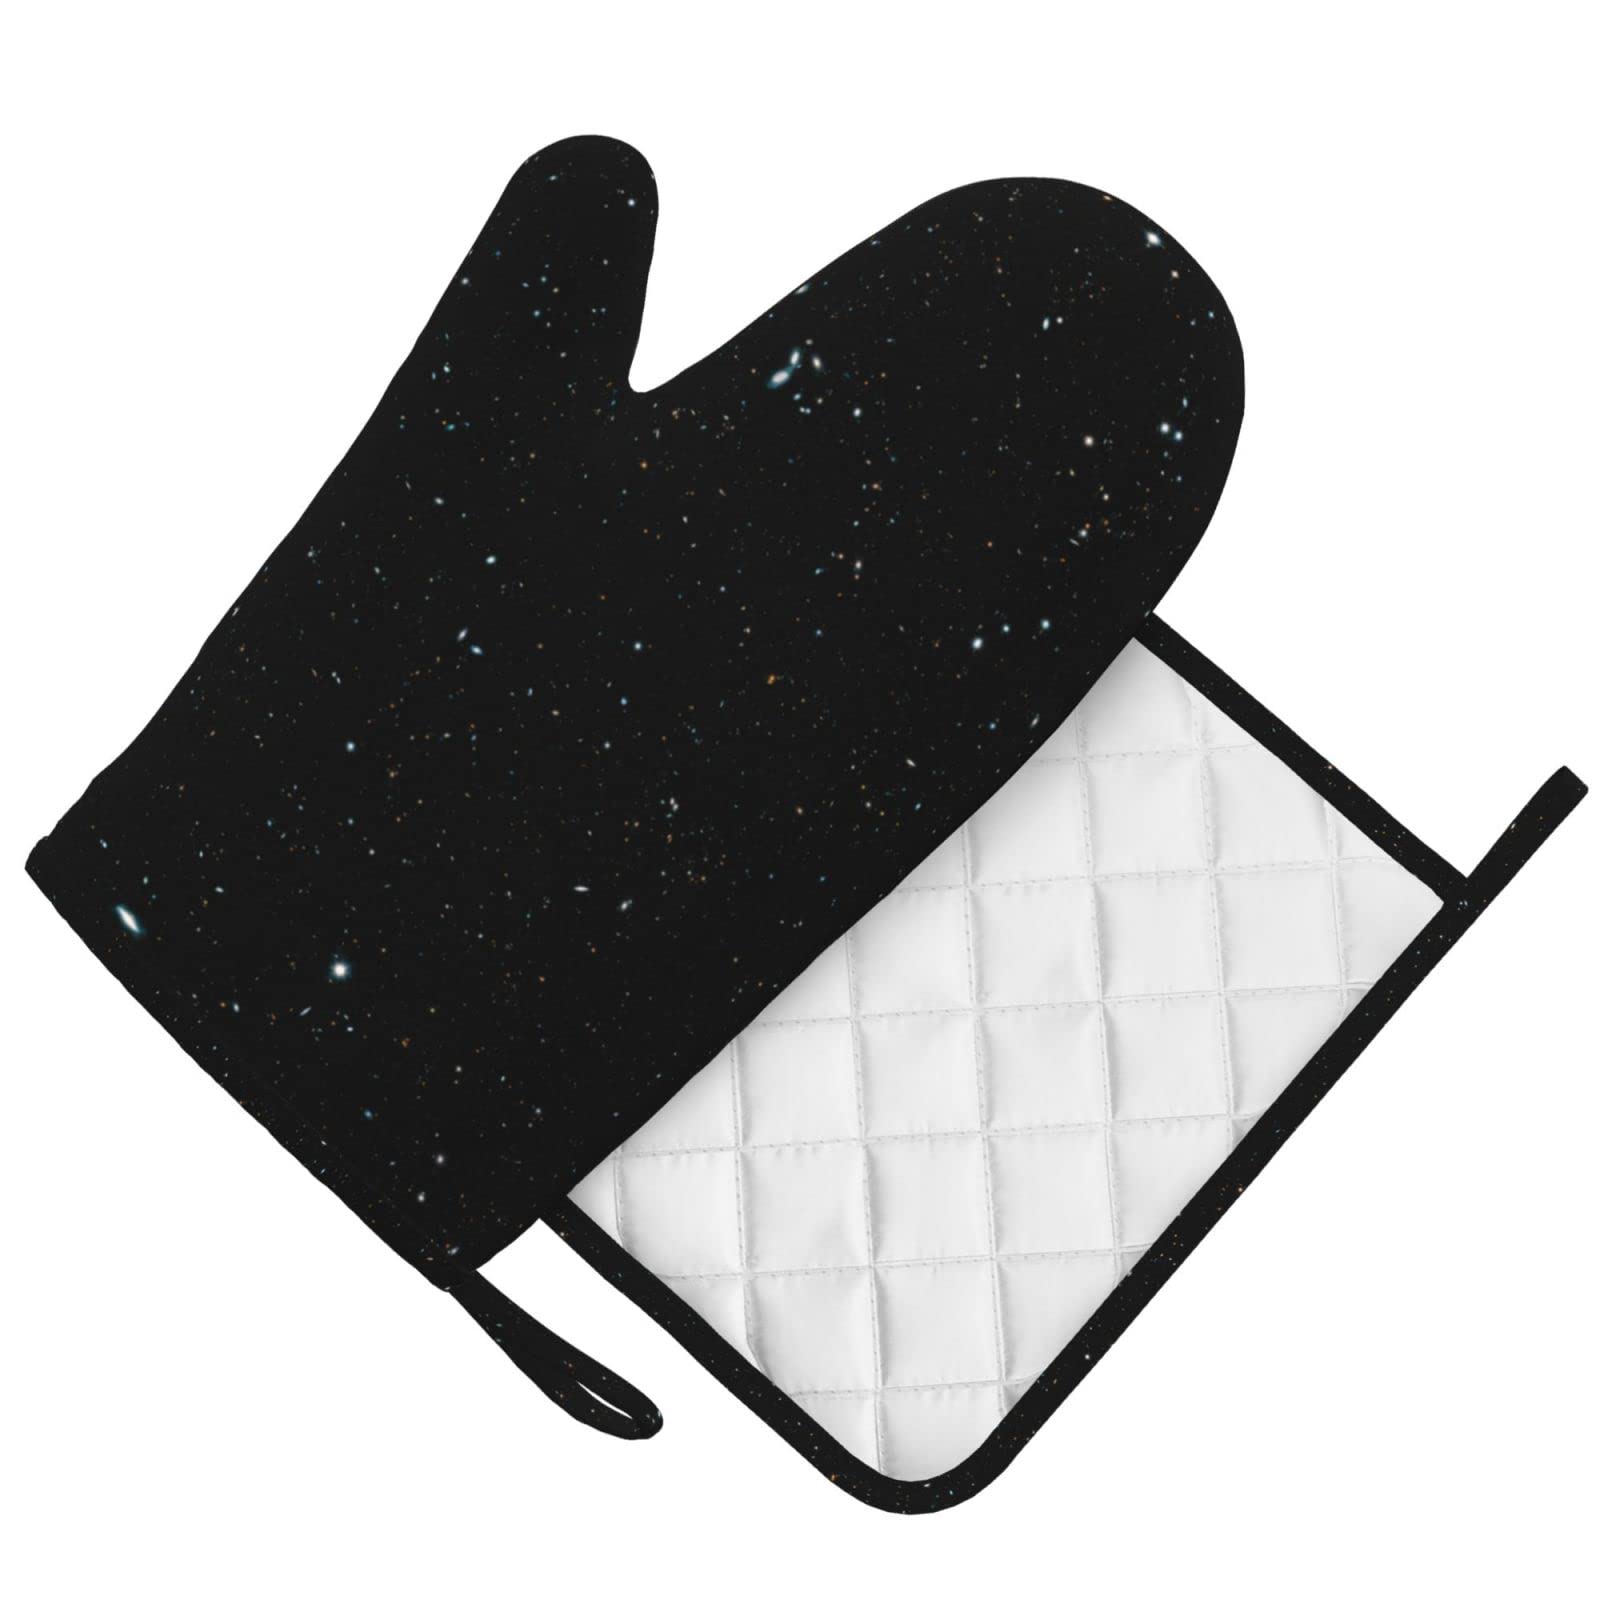 Black Glitter Silicone Oven Mitts Pot Holder Sets 2pcs Cute Design Washable Non Slip Kitchen Heat Resistant Mat Women's Cooking Gloves for Baking and BBQ Wear